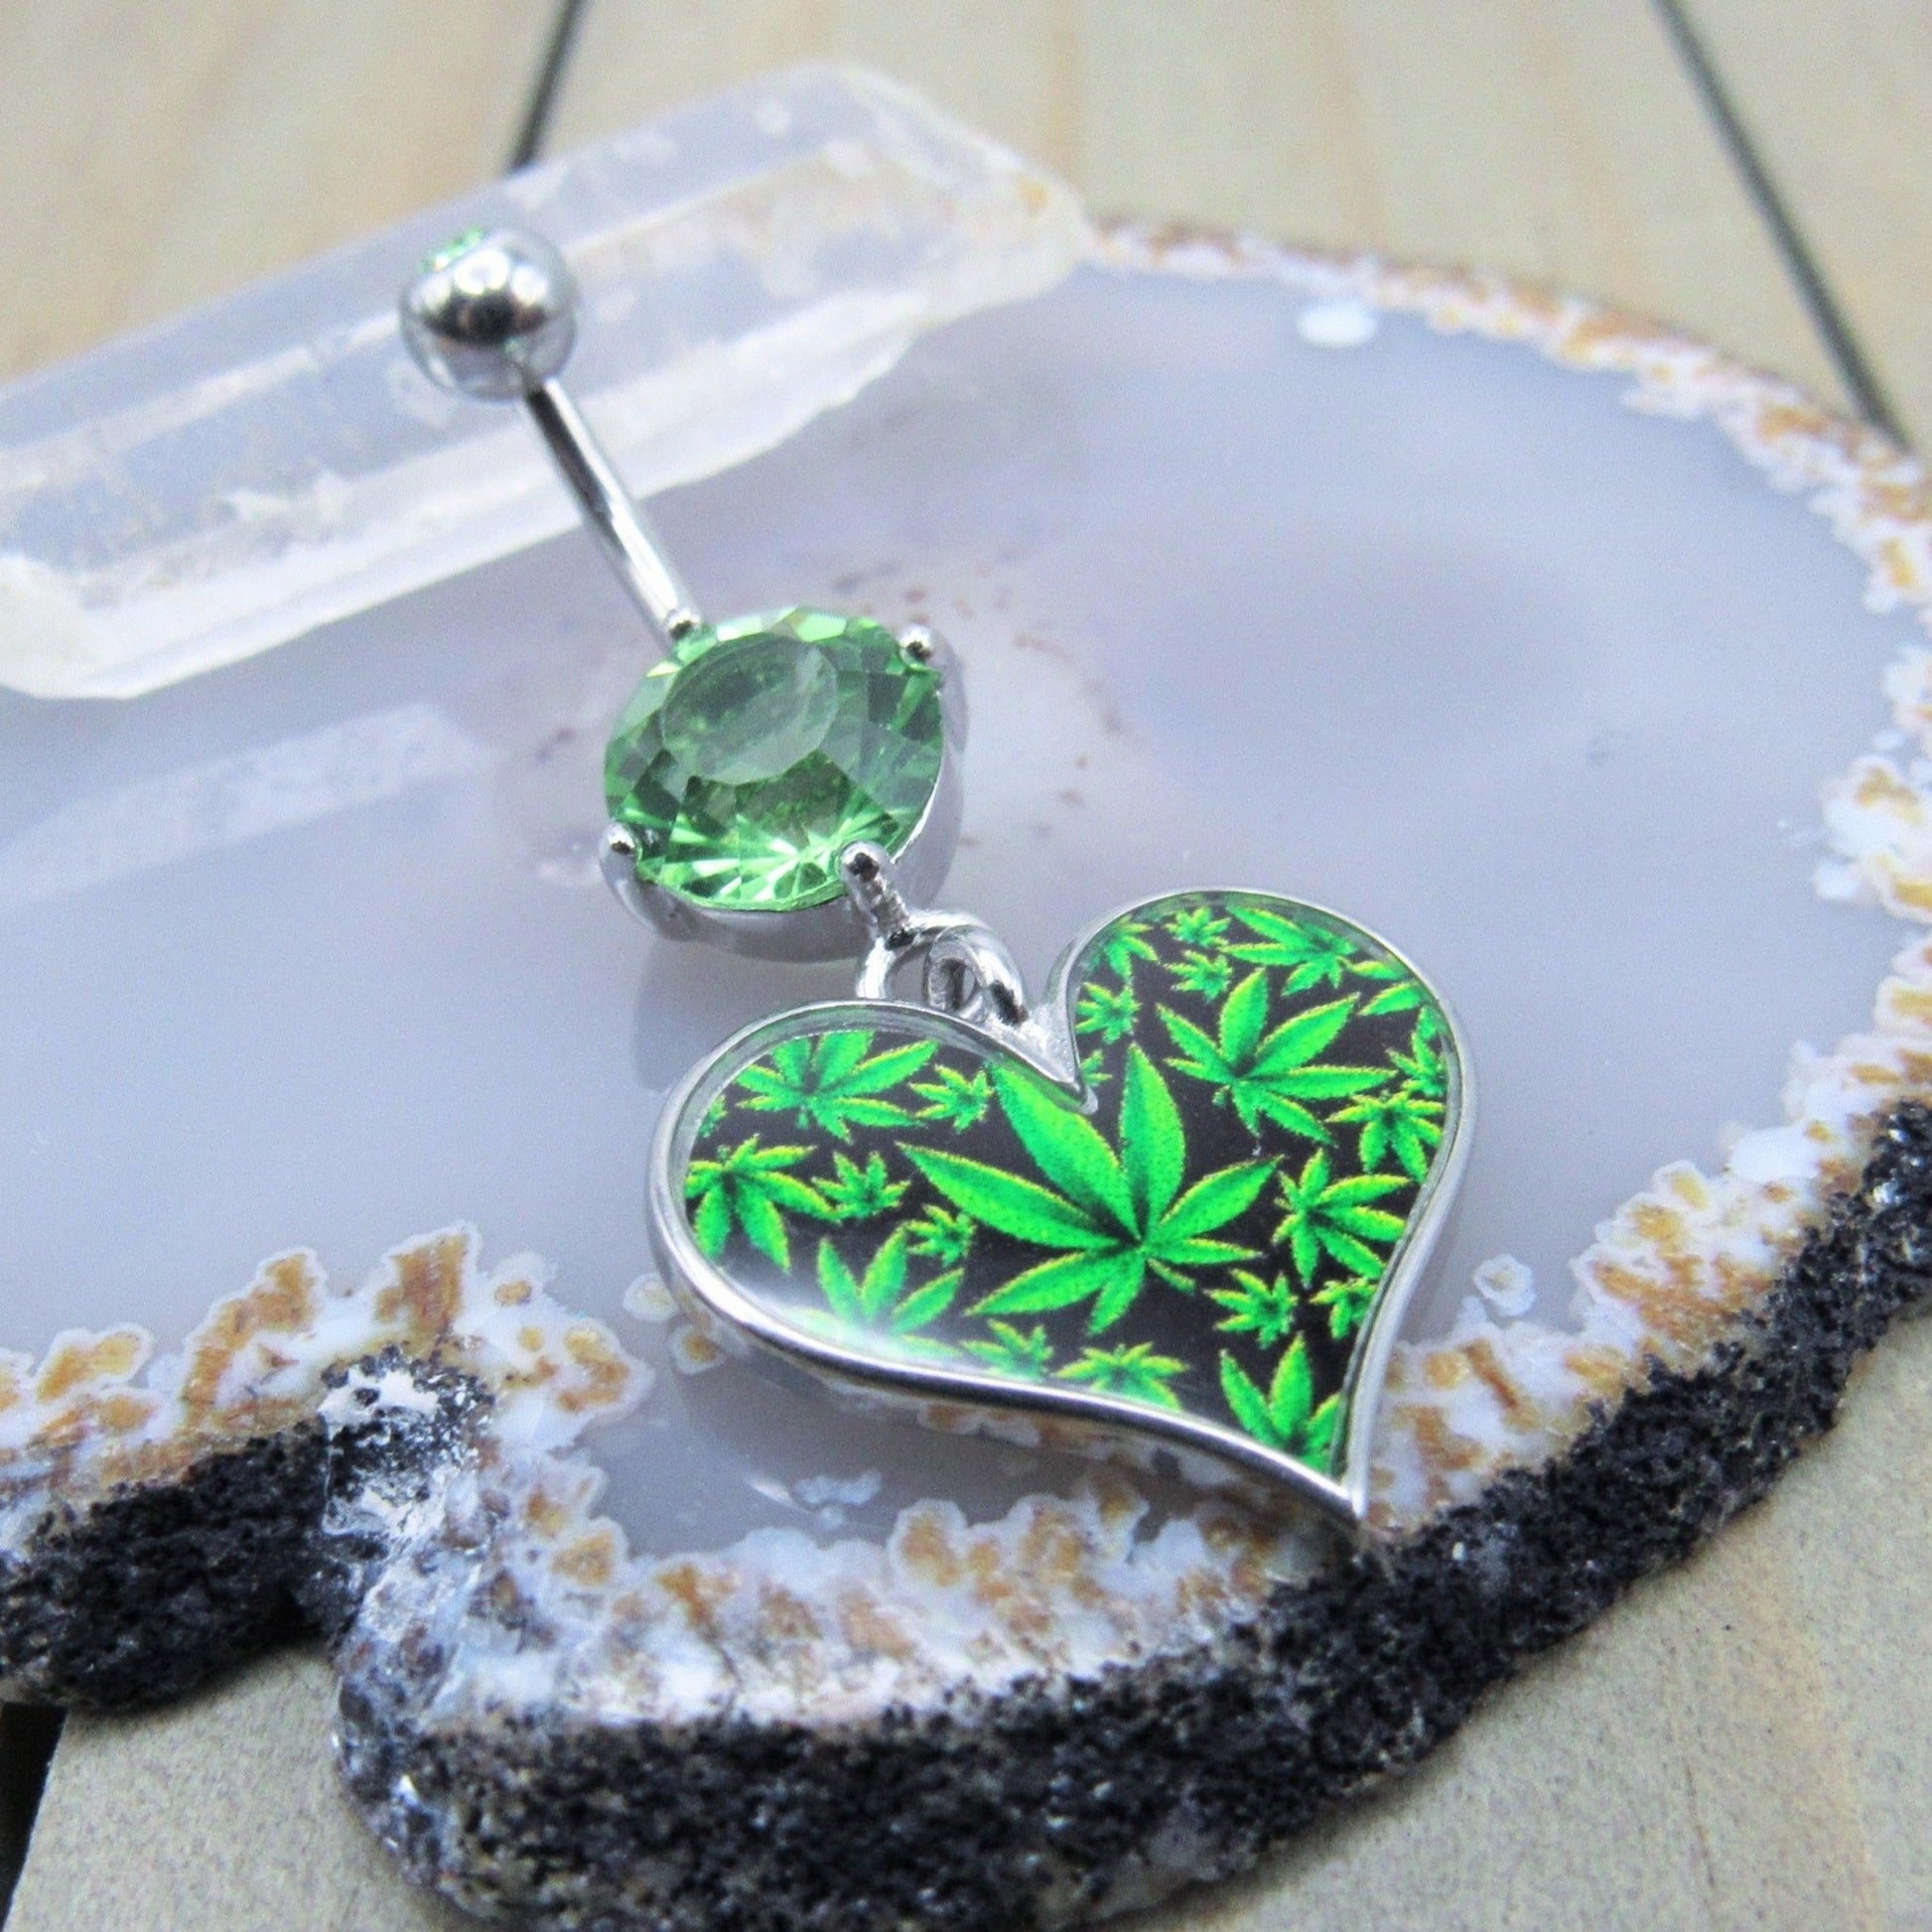 14g green gemstone heart weed dangle belly button piercing ring 3/8" length silver 316L stainless steel body jewelry - Siren Body Jewelry